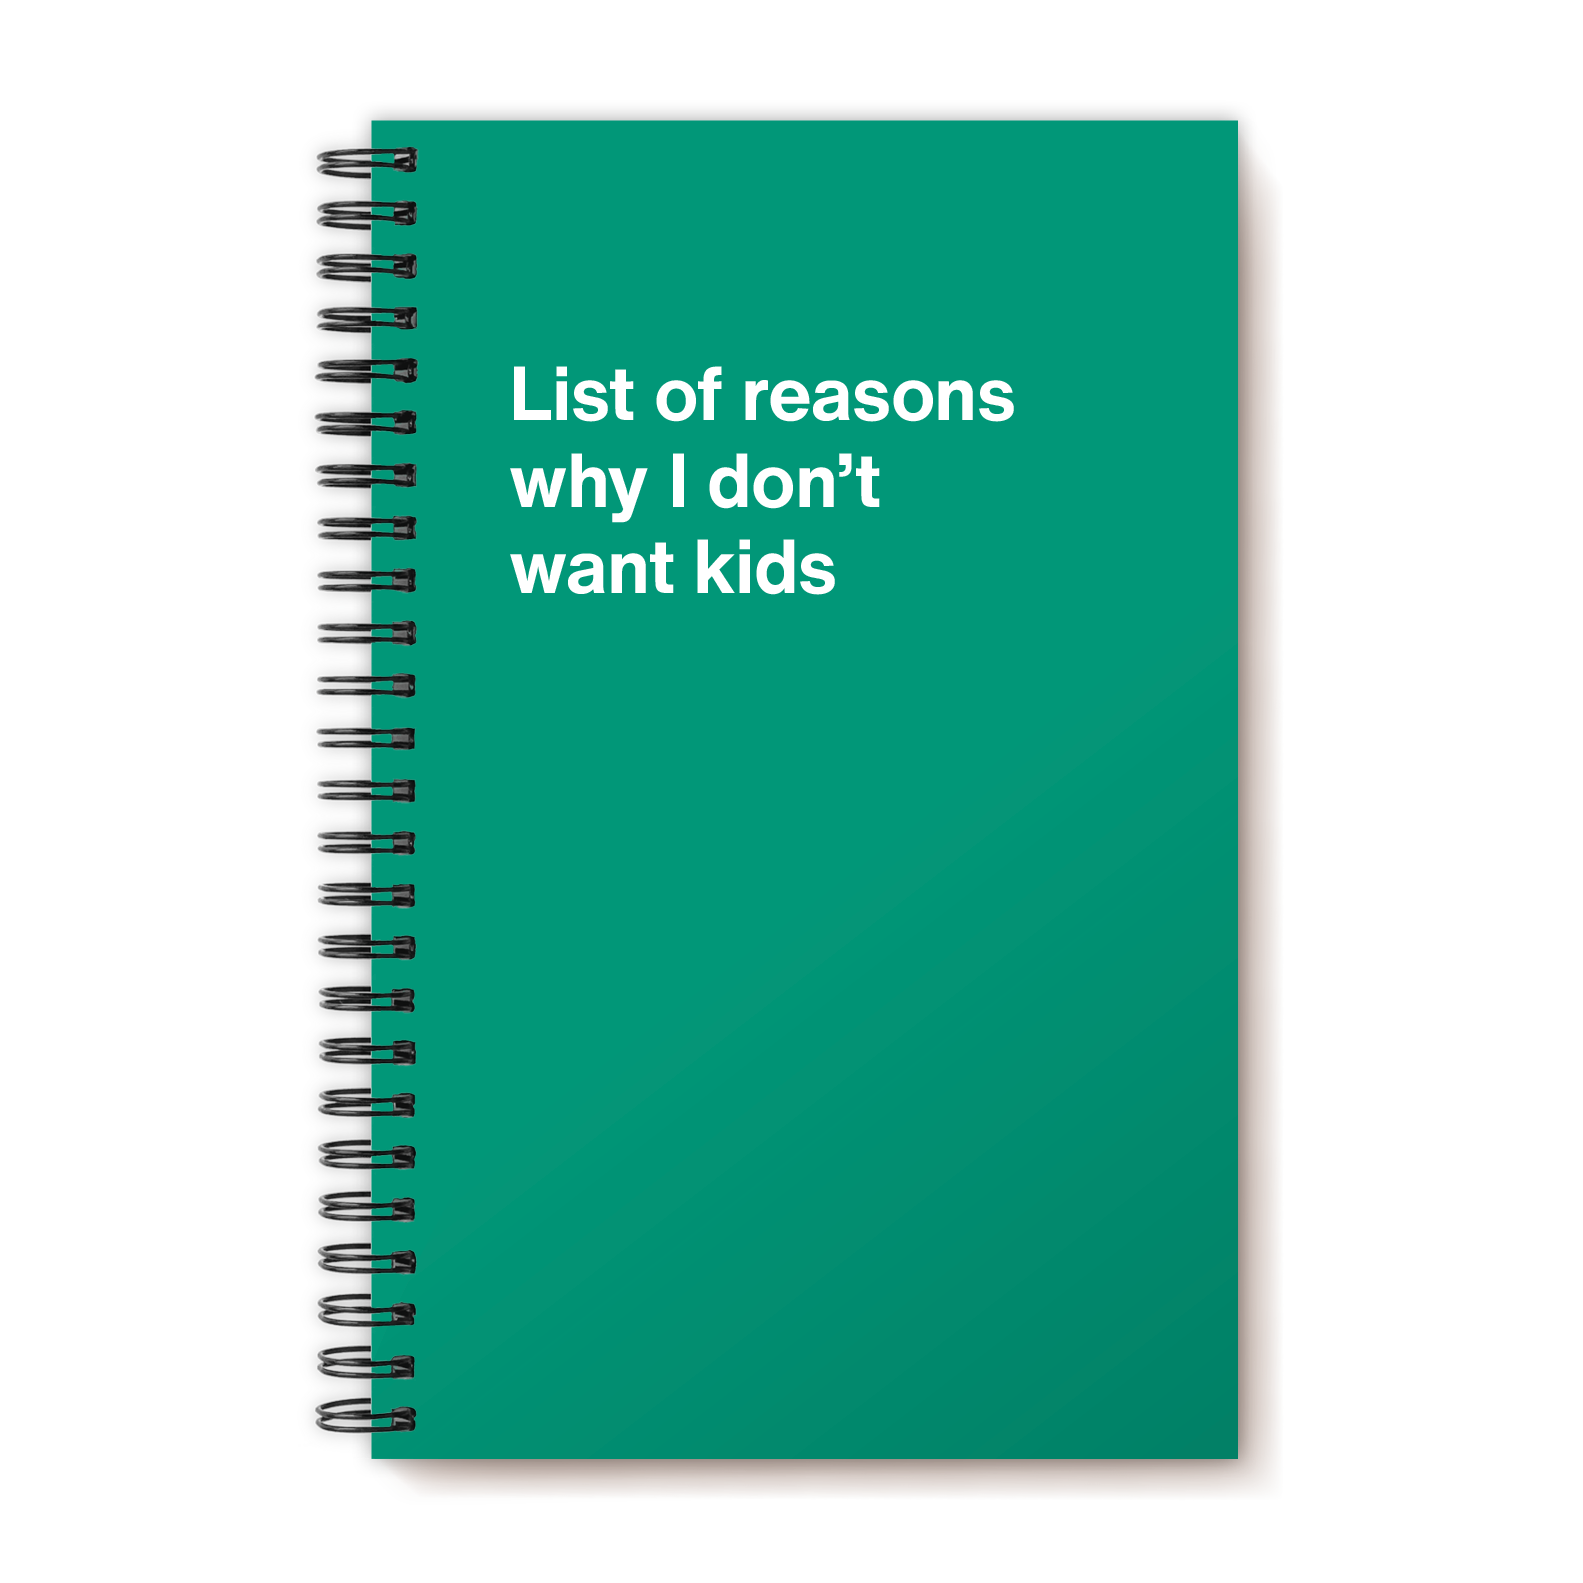 List of reasons why I don't want kids | WTF Notebooks